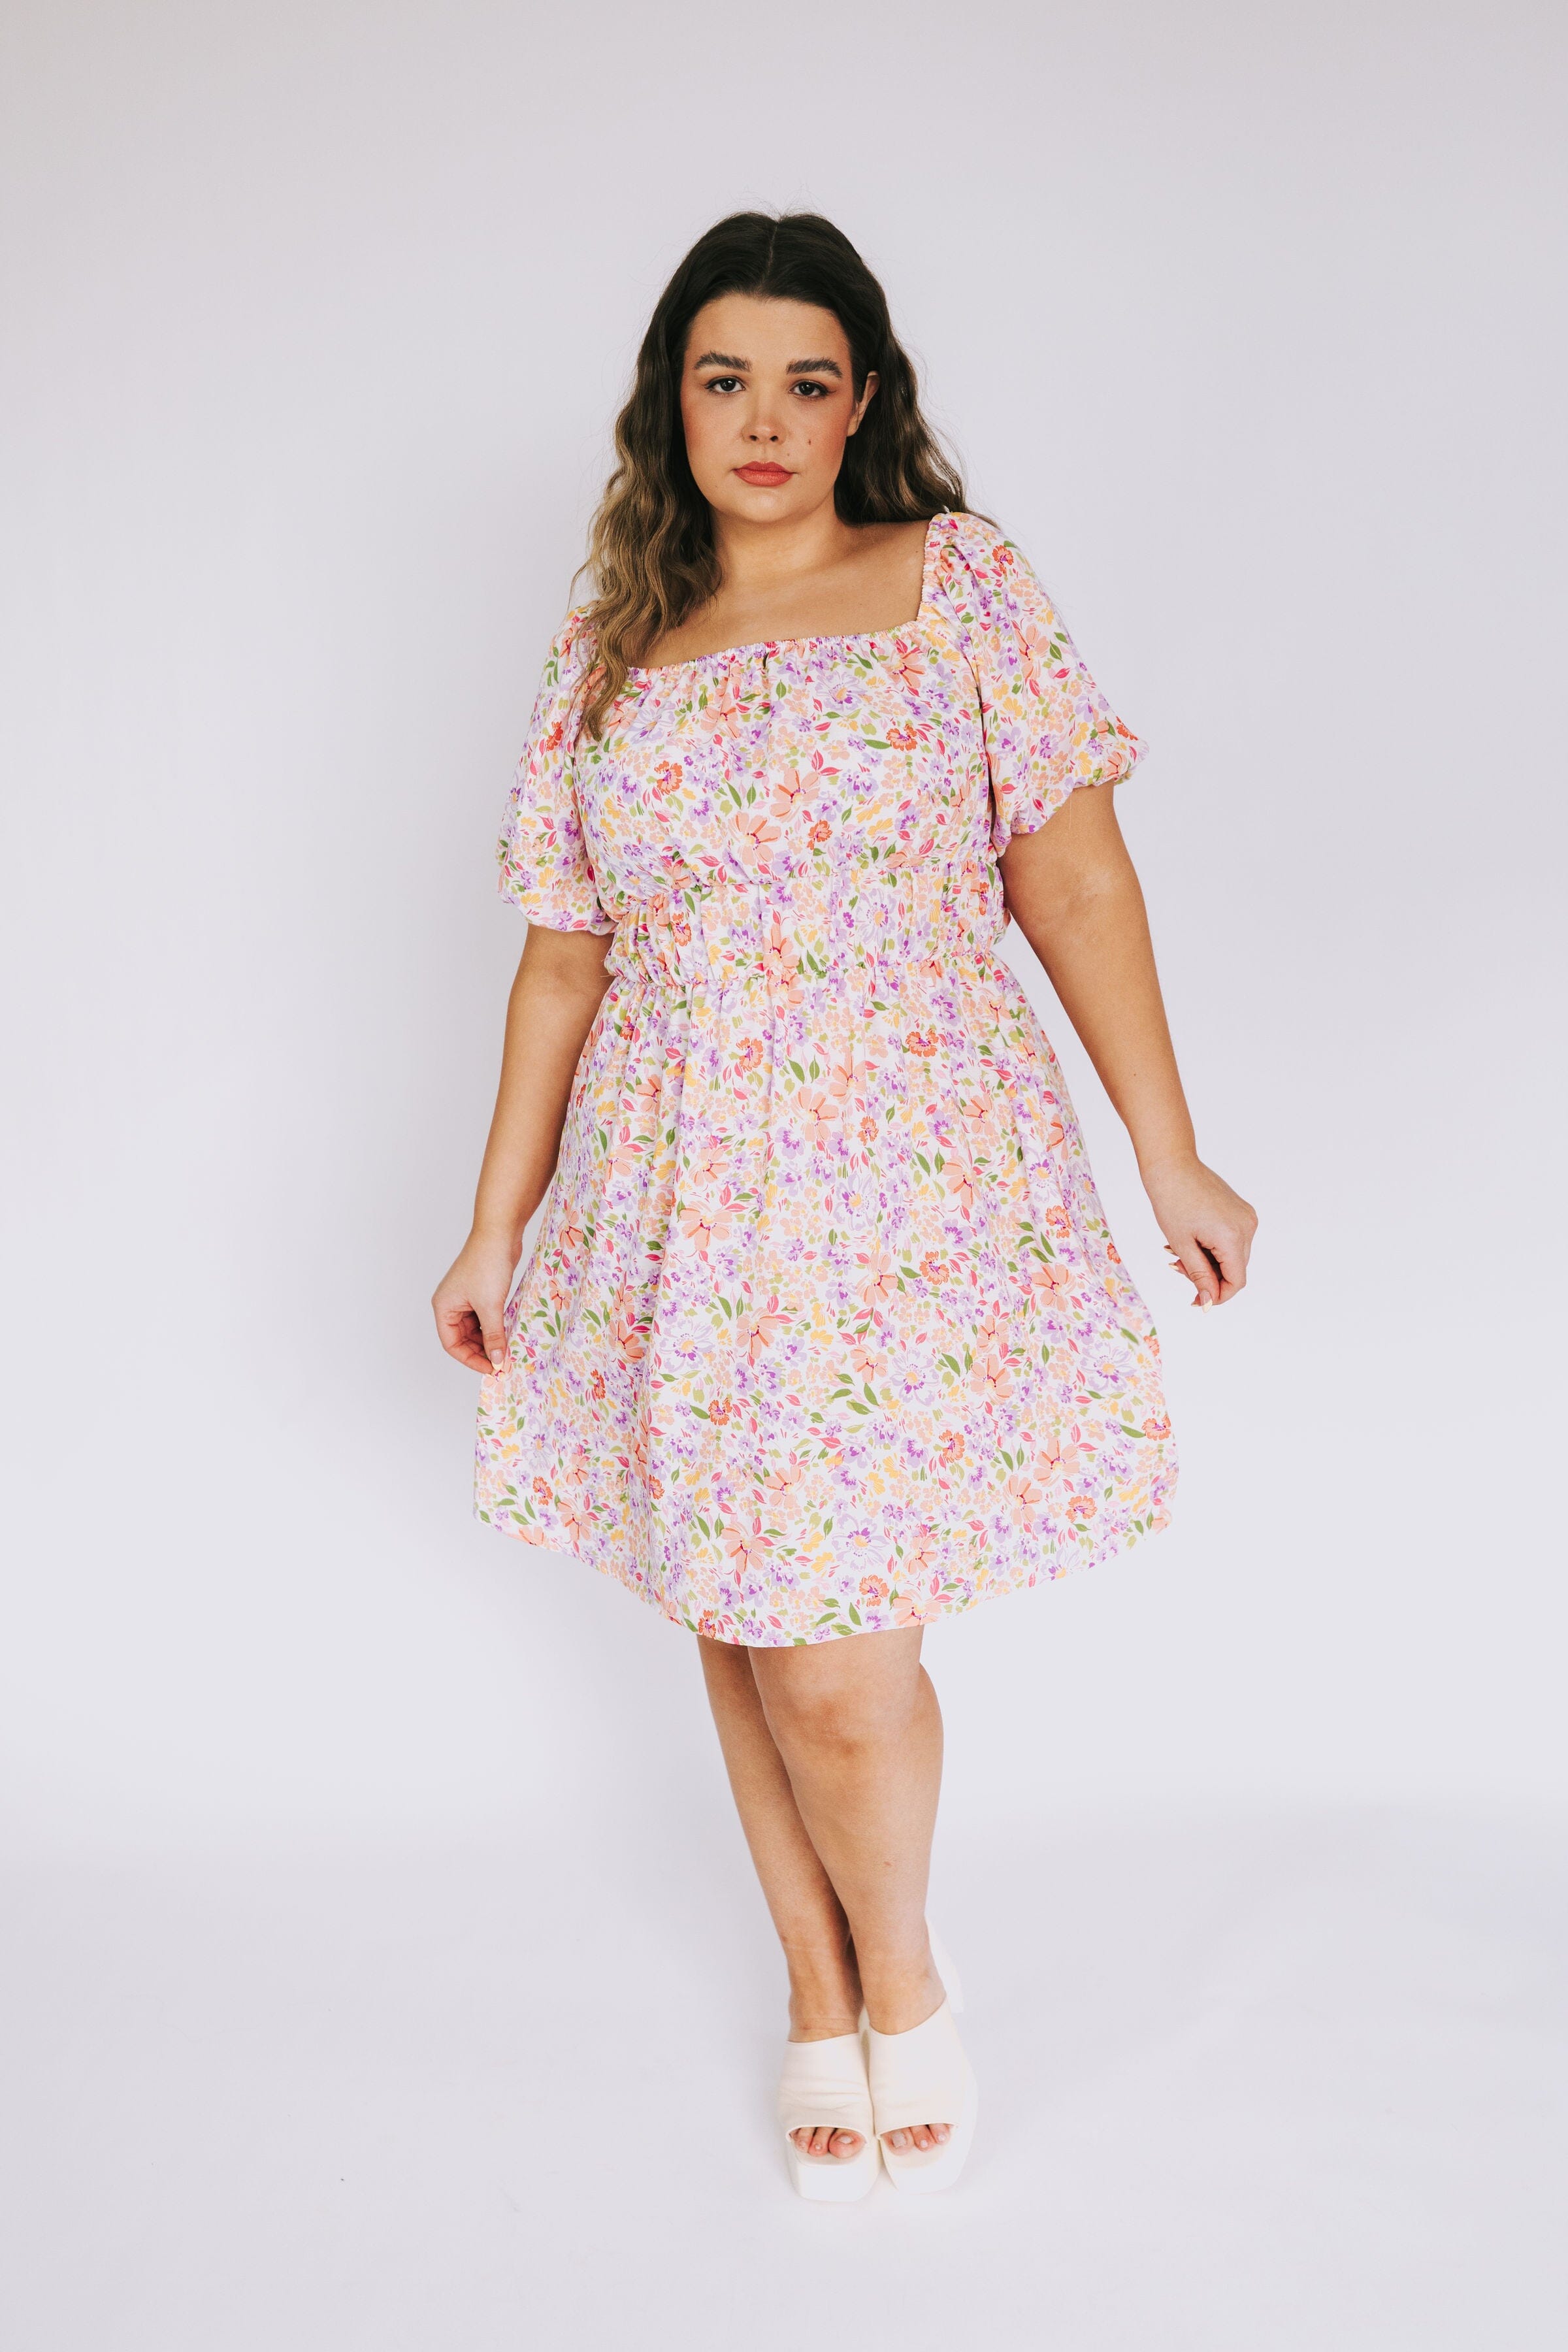 PLUS SIZE - Record Spinning Dress